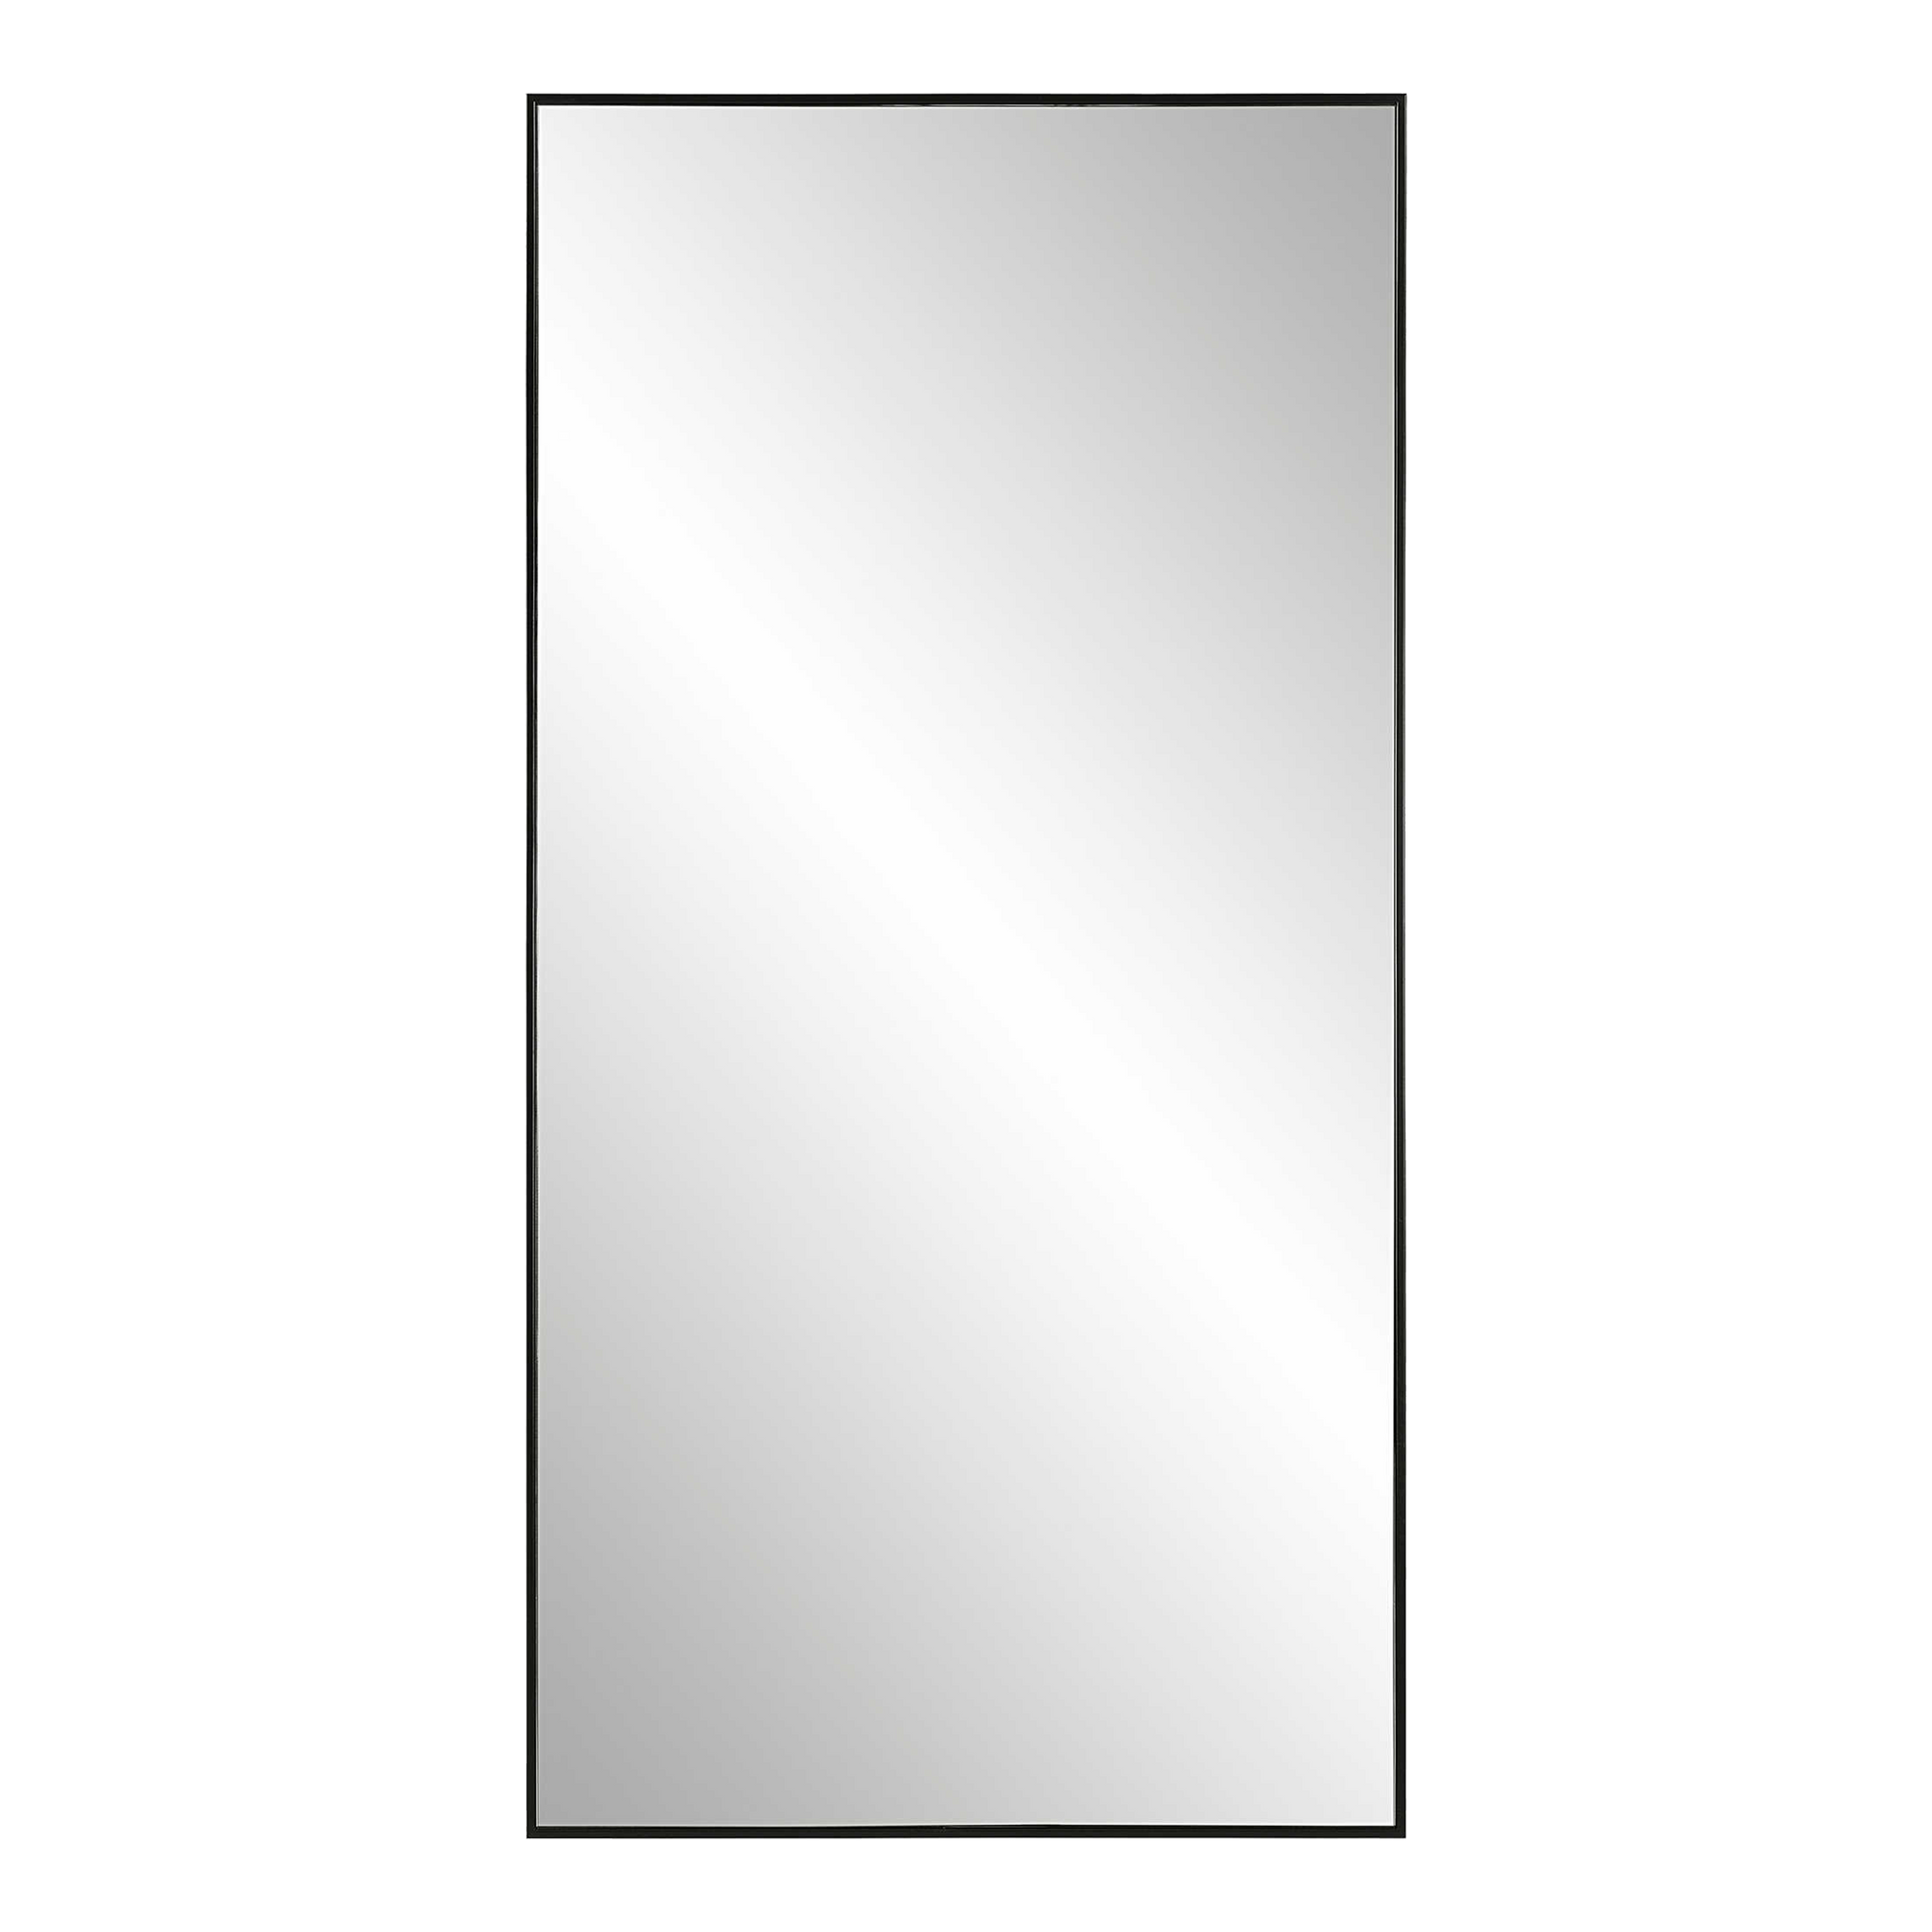 This Gallery Floor Mirror features a slim gallery-style steel frame finished in satin black.